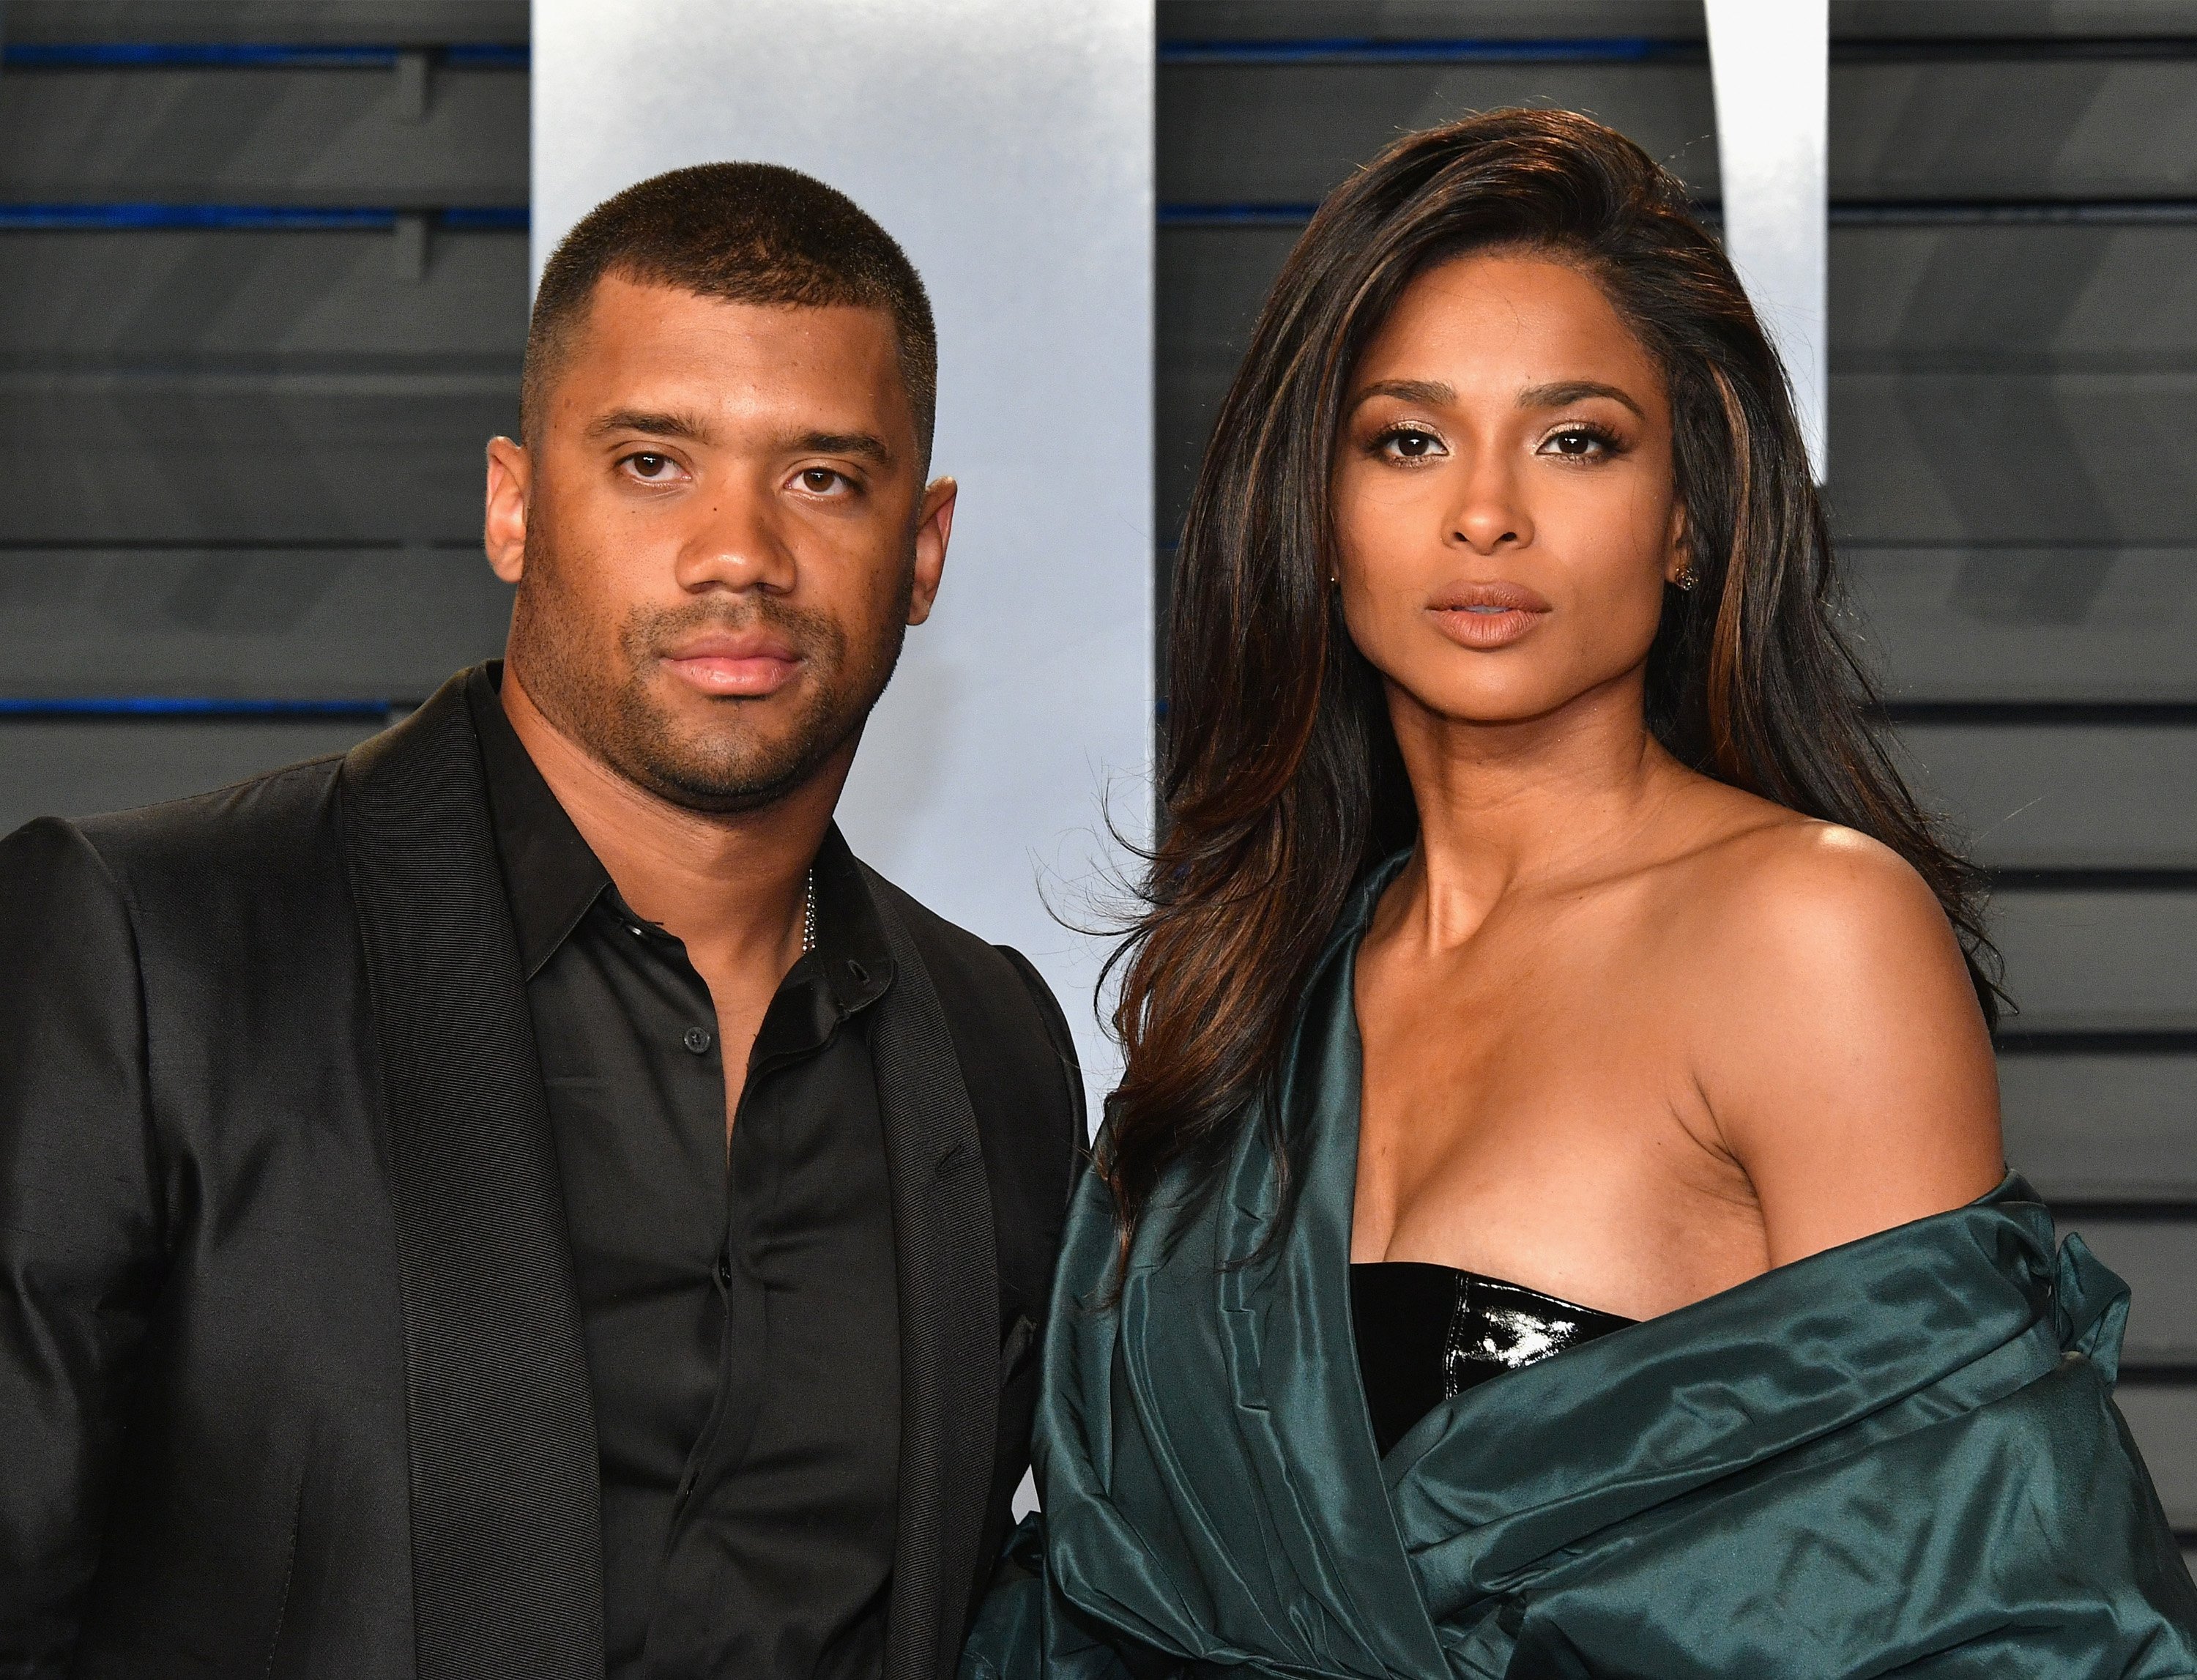 Russell Wilson and Ciara attend the 2018 Vanity Fair Oscar Party hosted by Radhika Jones at Wallis Annenberg Center for the Performing Arts on March 4, 2018 in Beverly Hills, California. | Photo: GettyImages